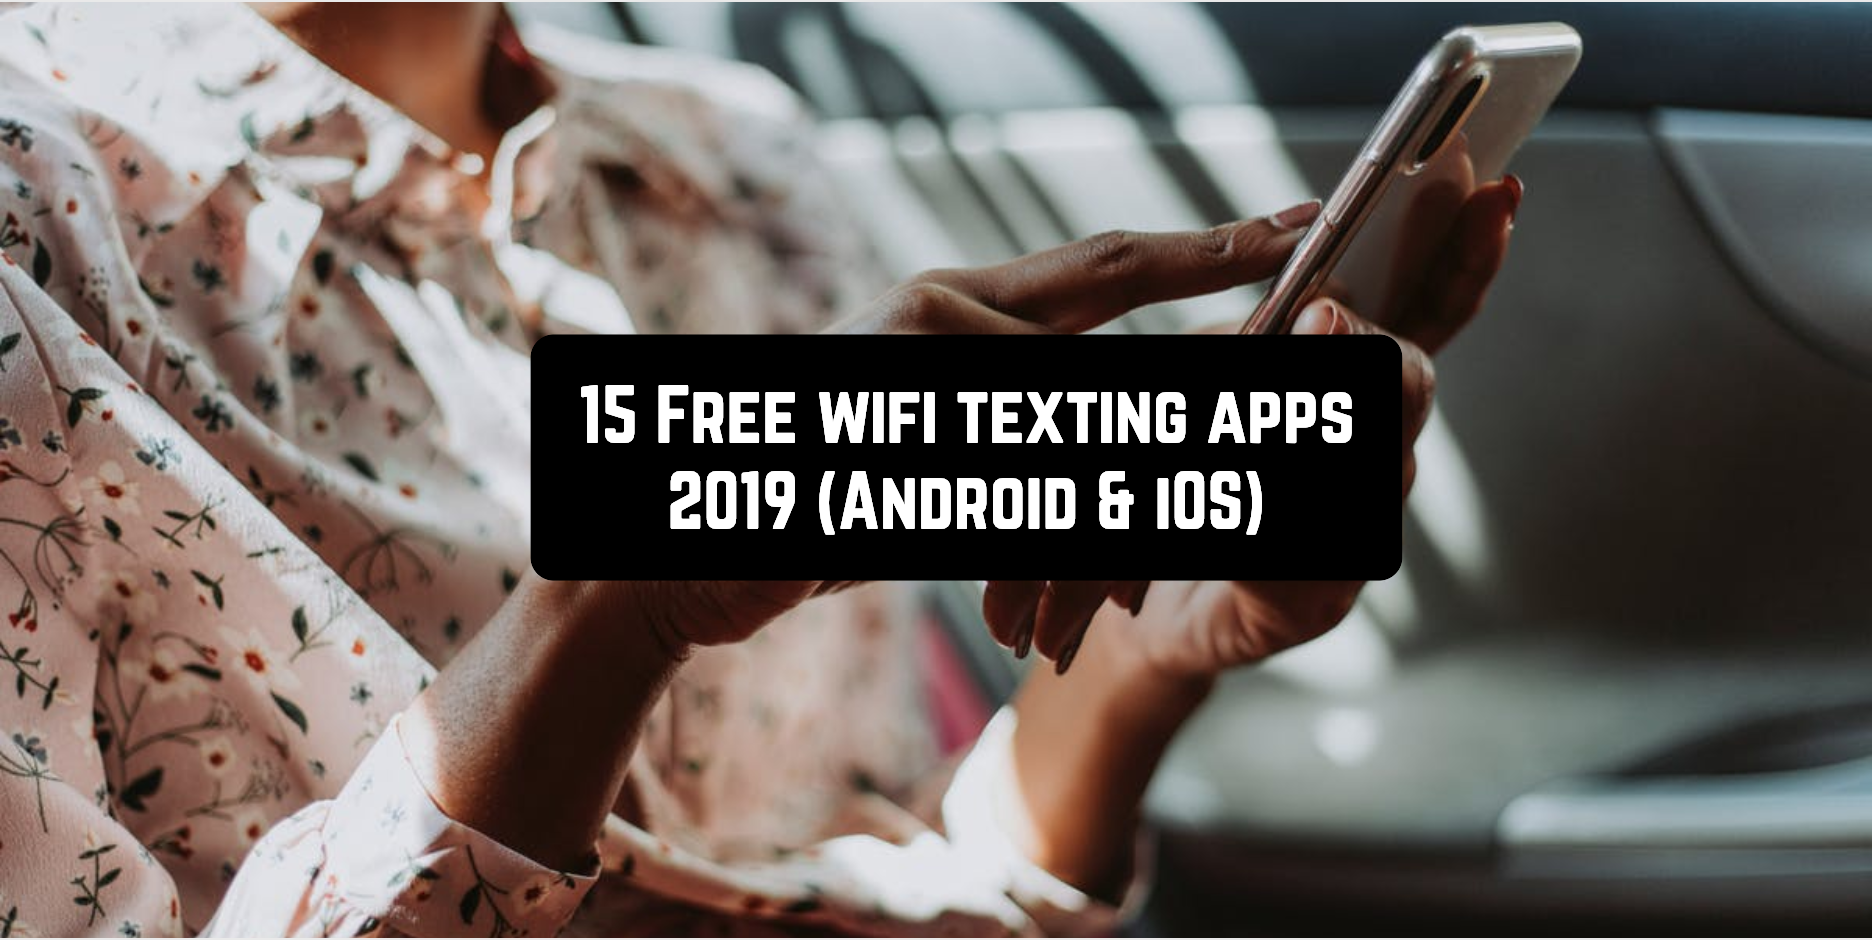 15 Free wifi texting apps 2019 (Android & iOS)